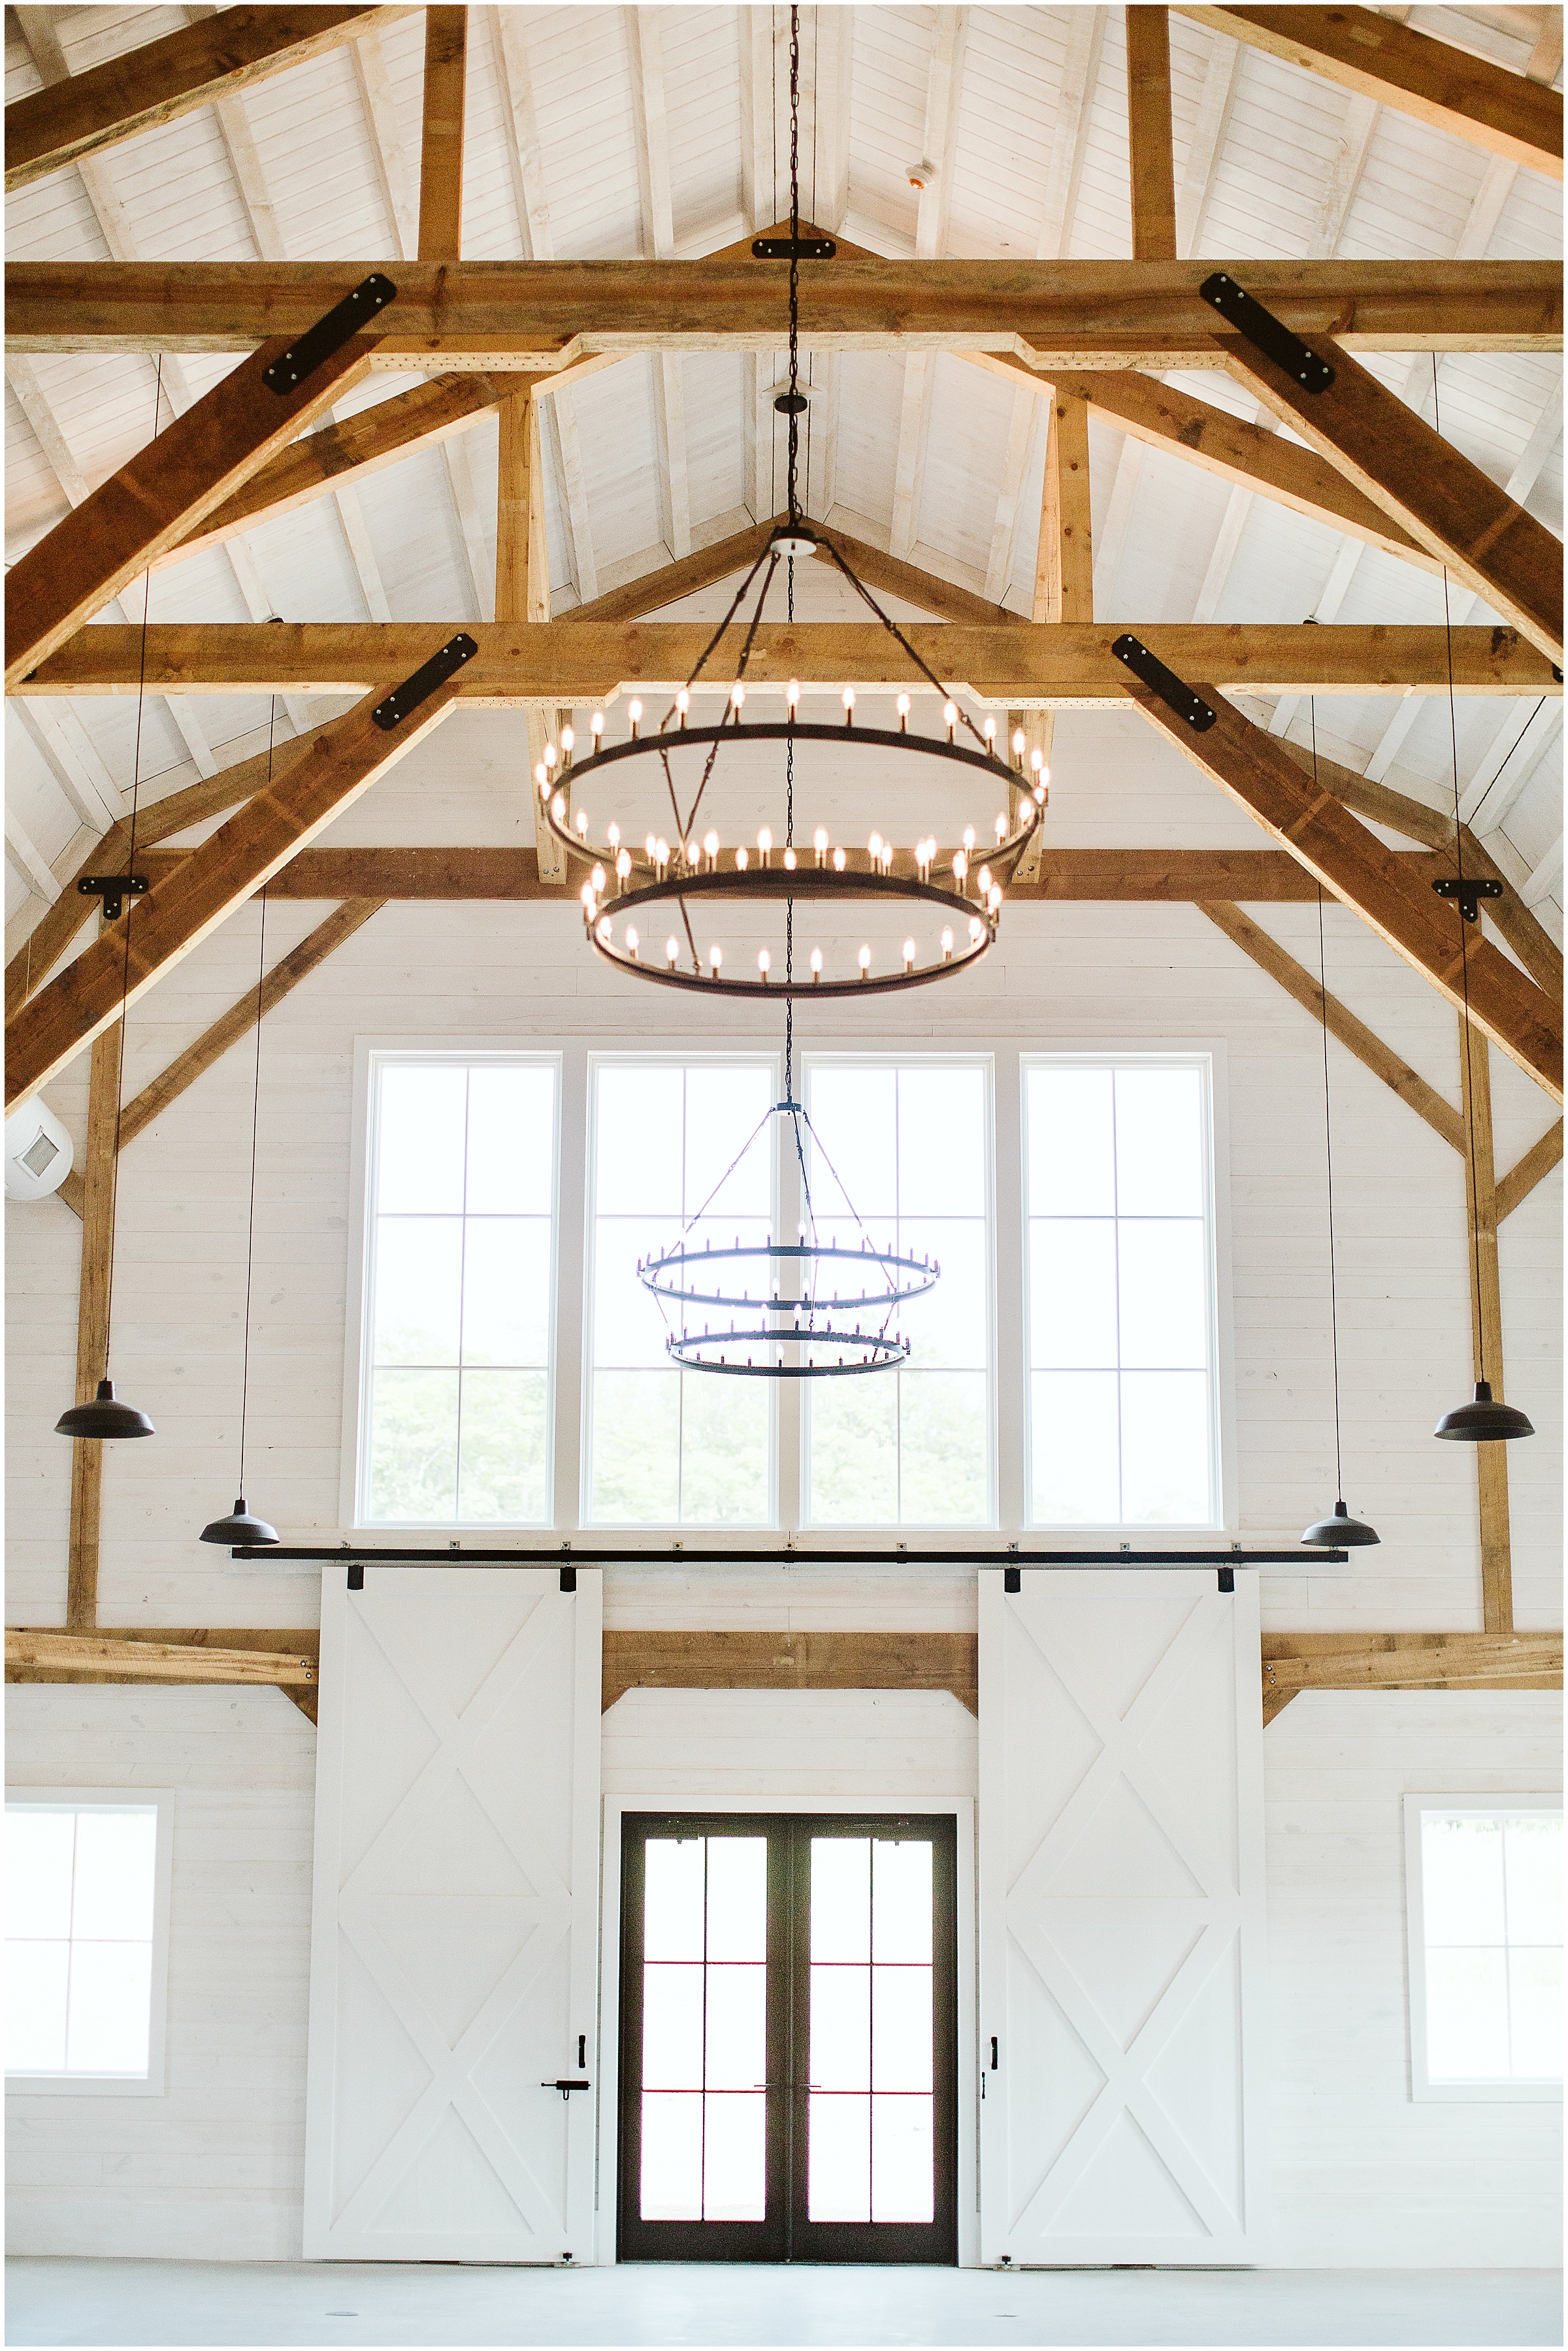 Northern Haus, Door County, Sister Bay, Venue, Alysa Rene Photography, Natural light, Modern Barn, Barn Wedding, White Barn, Sister Bay, Wisconsin, Midwest, Branding, Brand Photography,Commercia